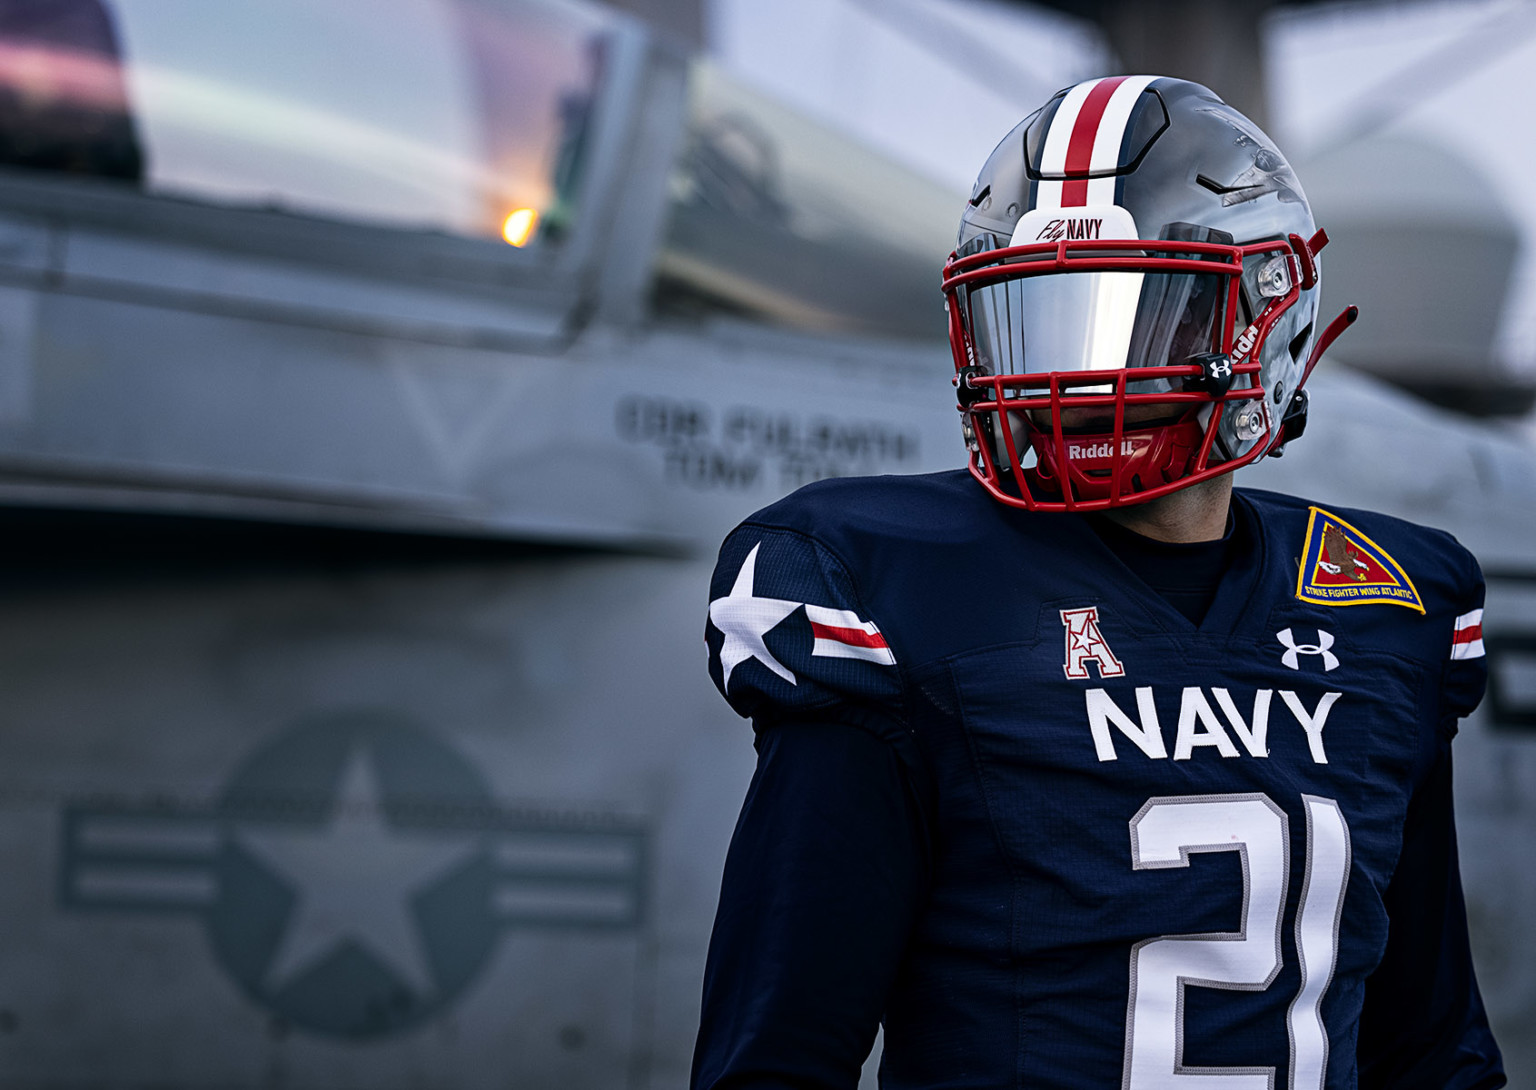 Photographing the 2021 Navy Football Uniform on an Aircraft Carrier